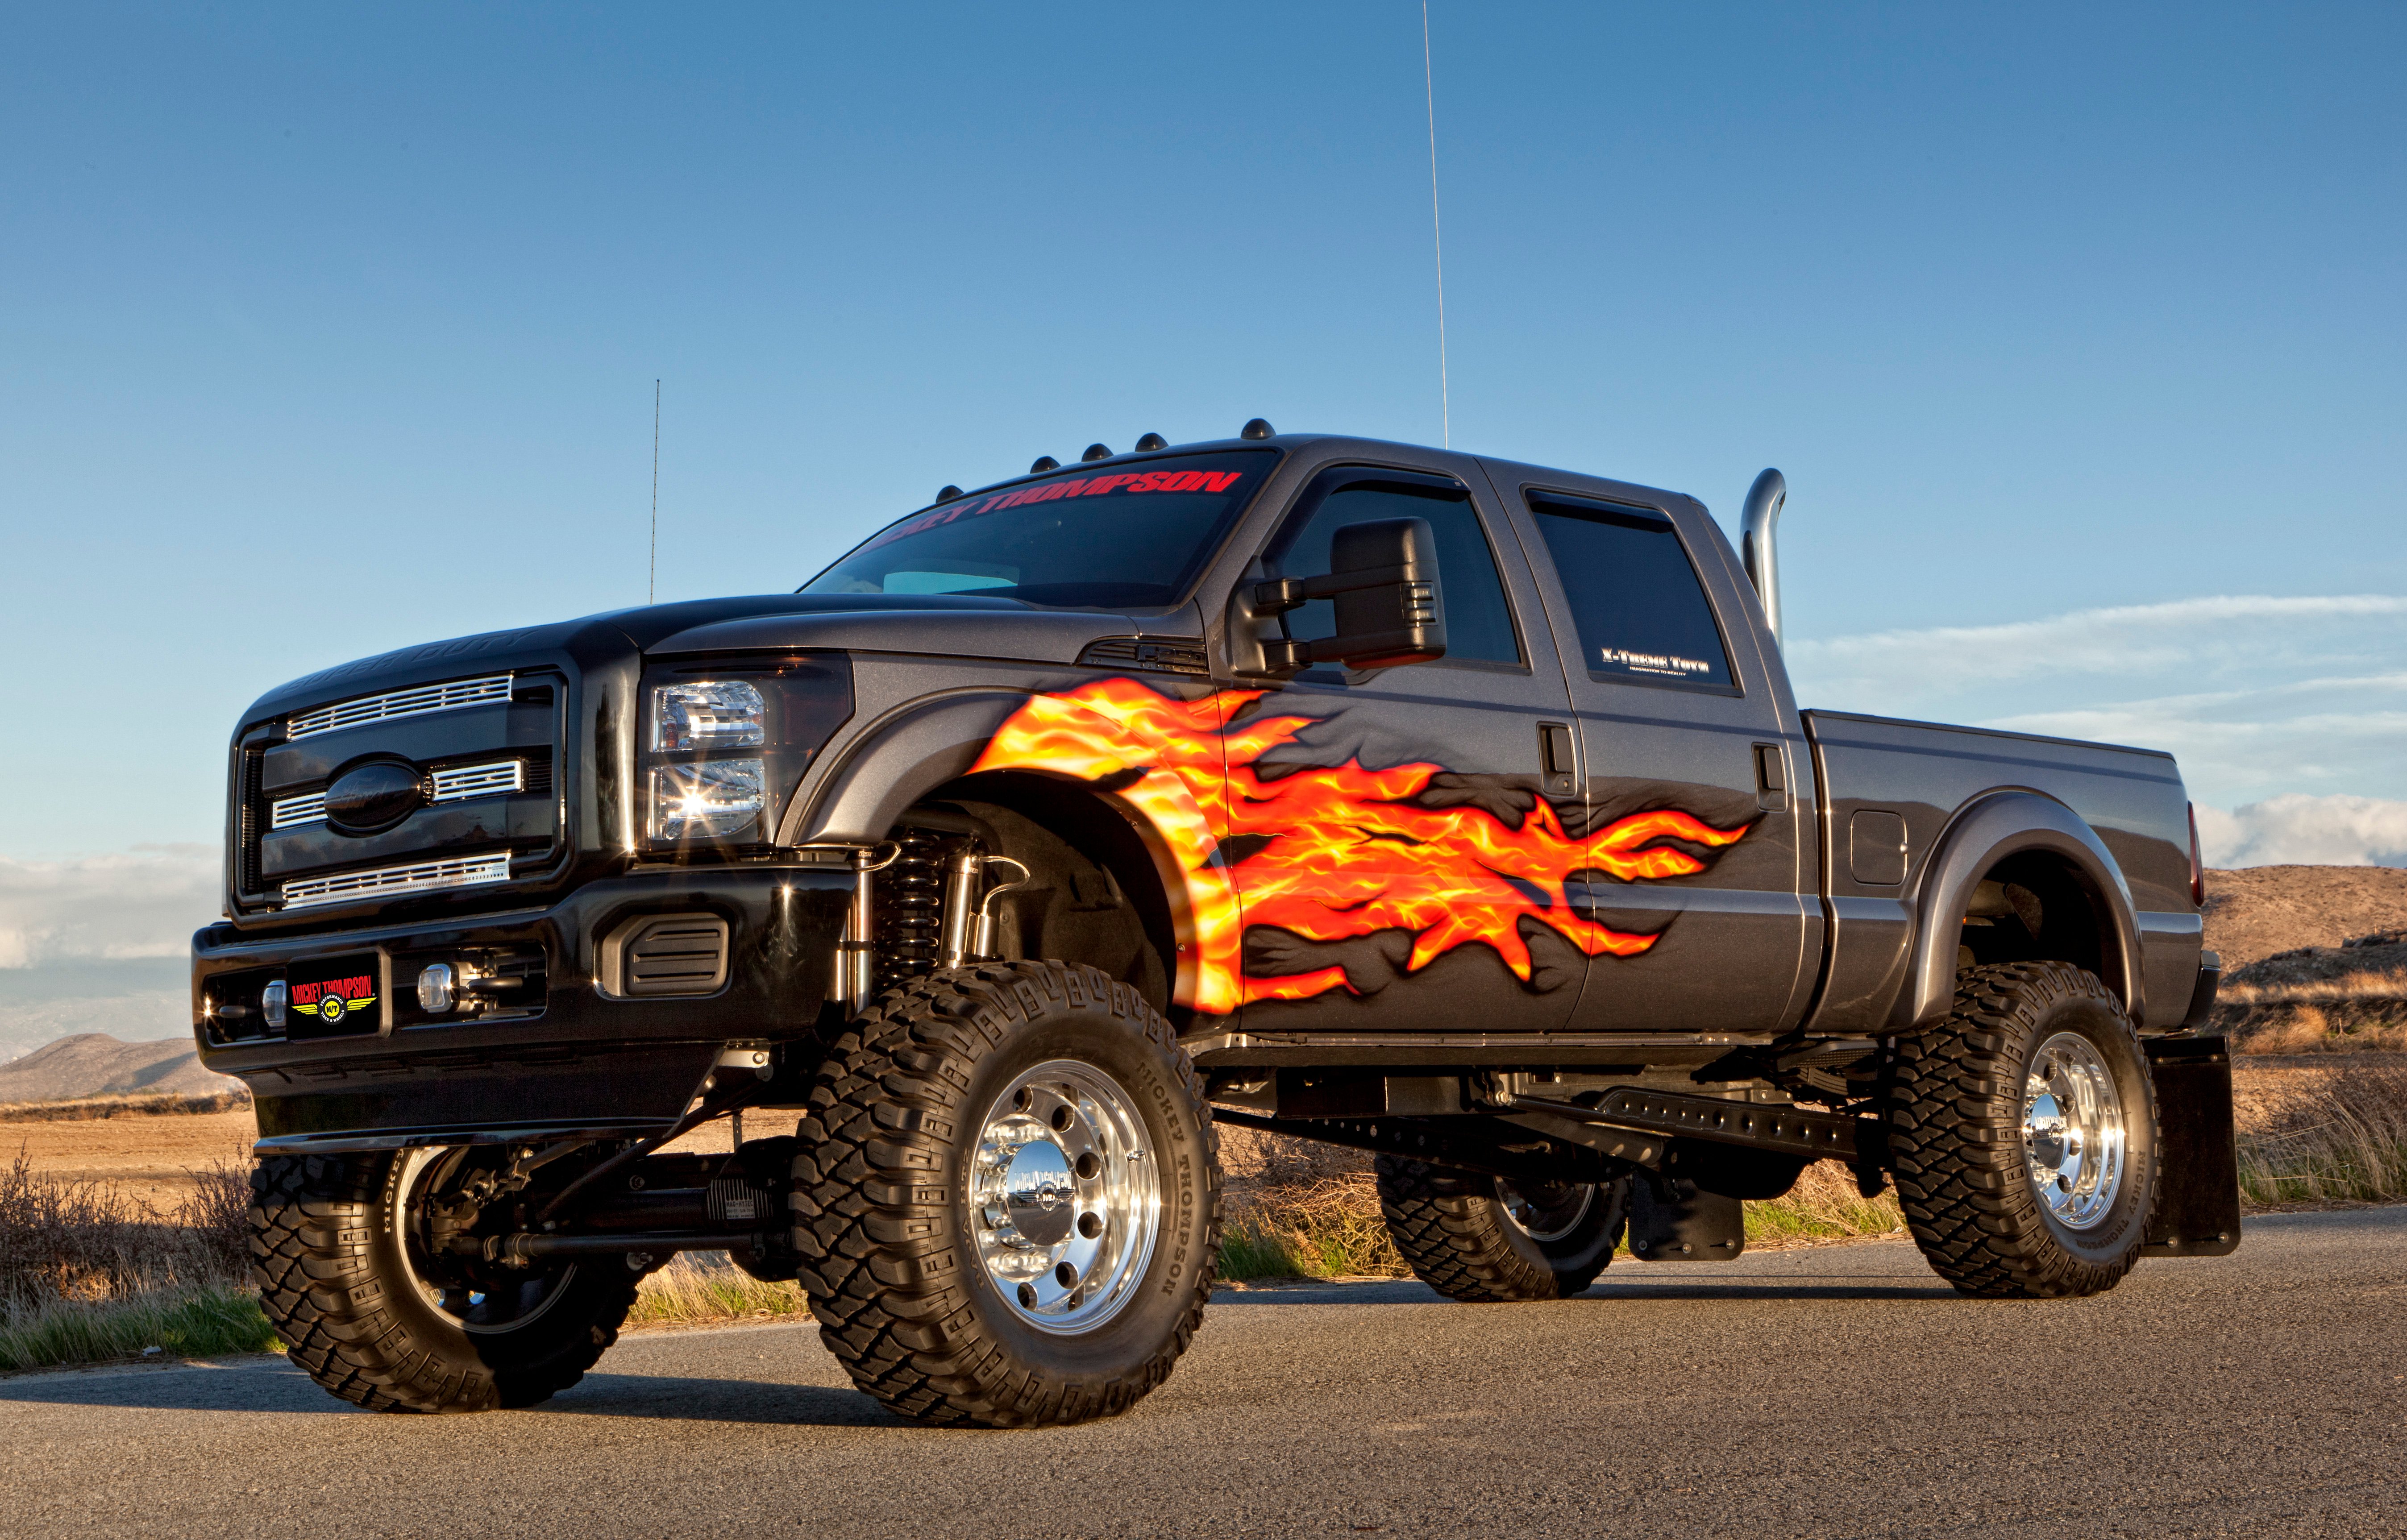 40+ Ford F250 For Truck Wallpaper 800 X 834 free download